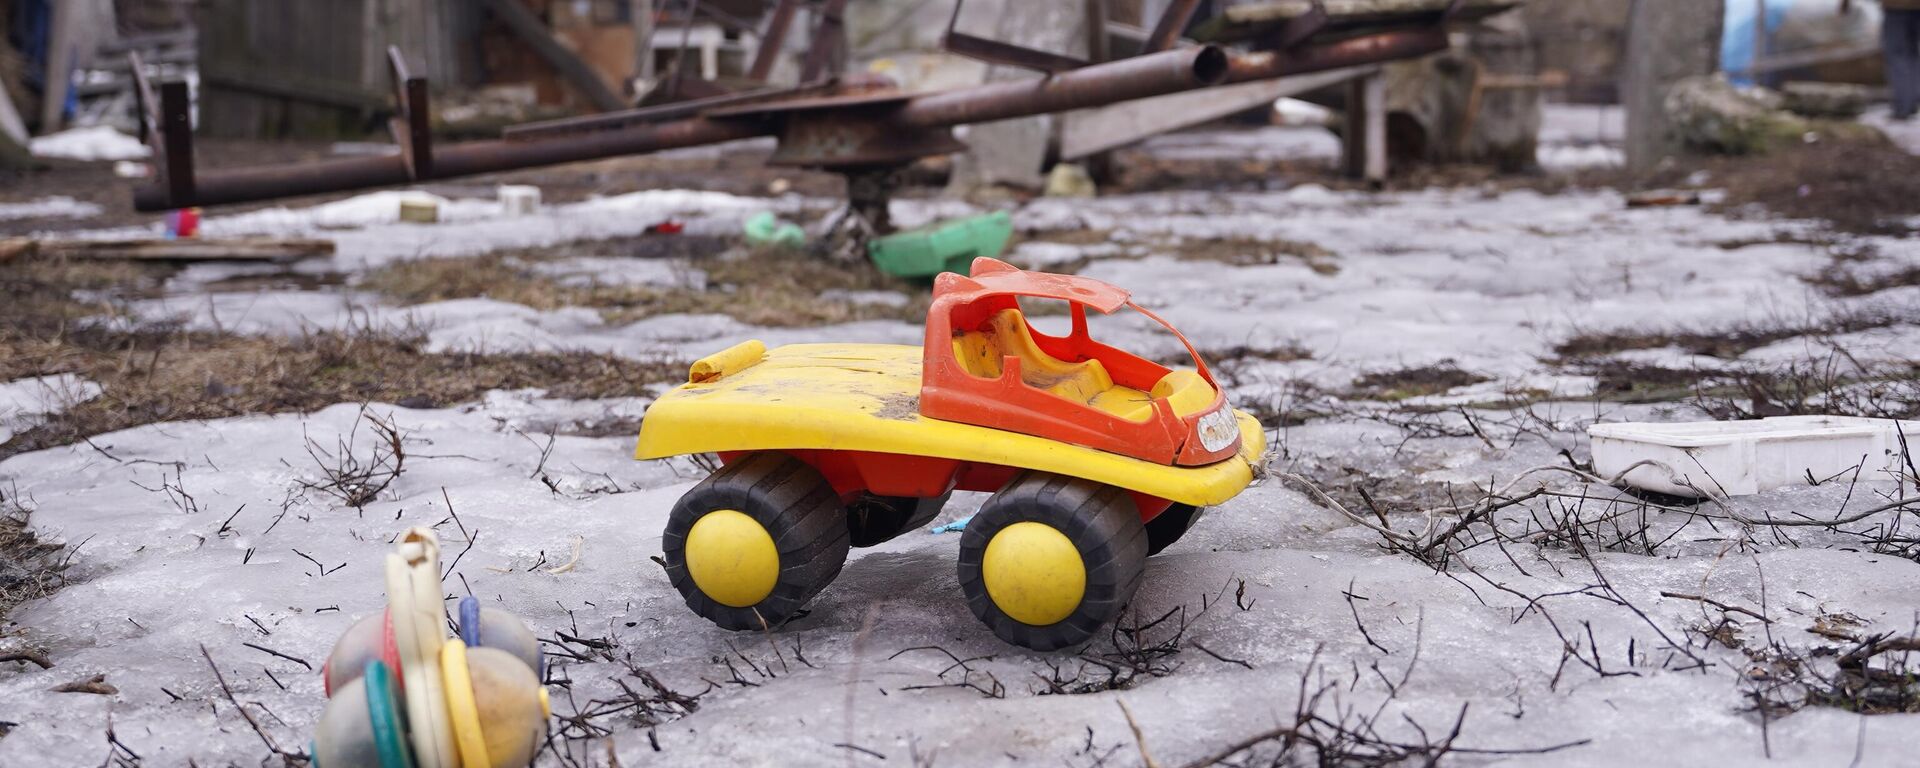 A toy is pictured on the contact line with Ukrainian armed forces in the village of Molodezhniy in Luhansk region, self-proclaimed Luhansk People's Republic, Eastern Ukraine - Sputnik International, 1920, 18.02.2022